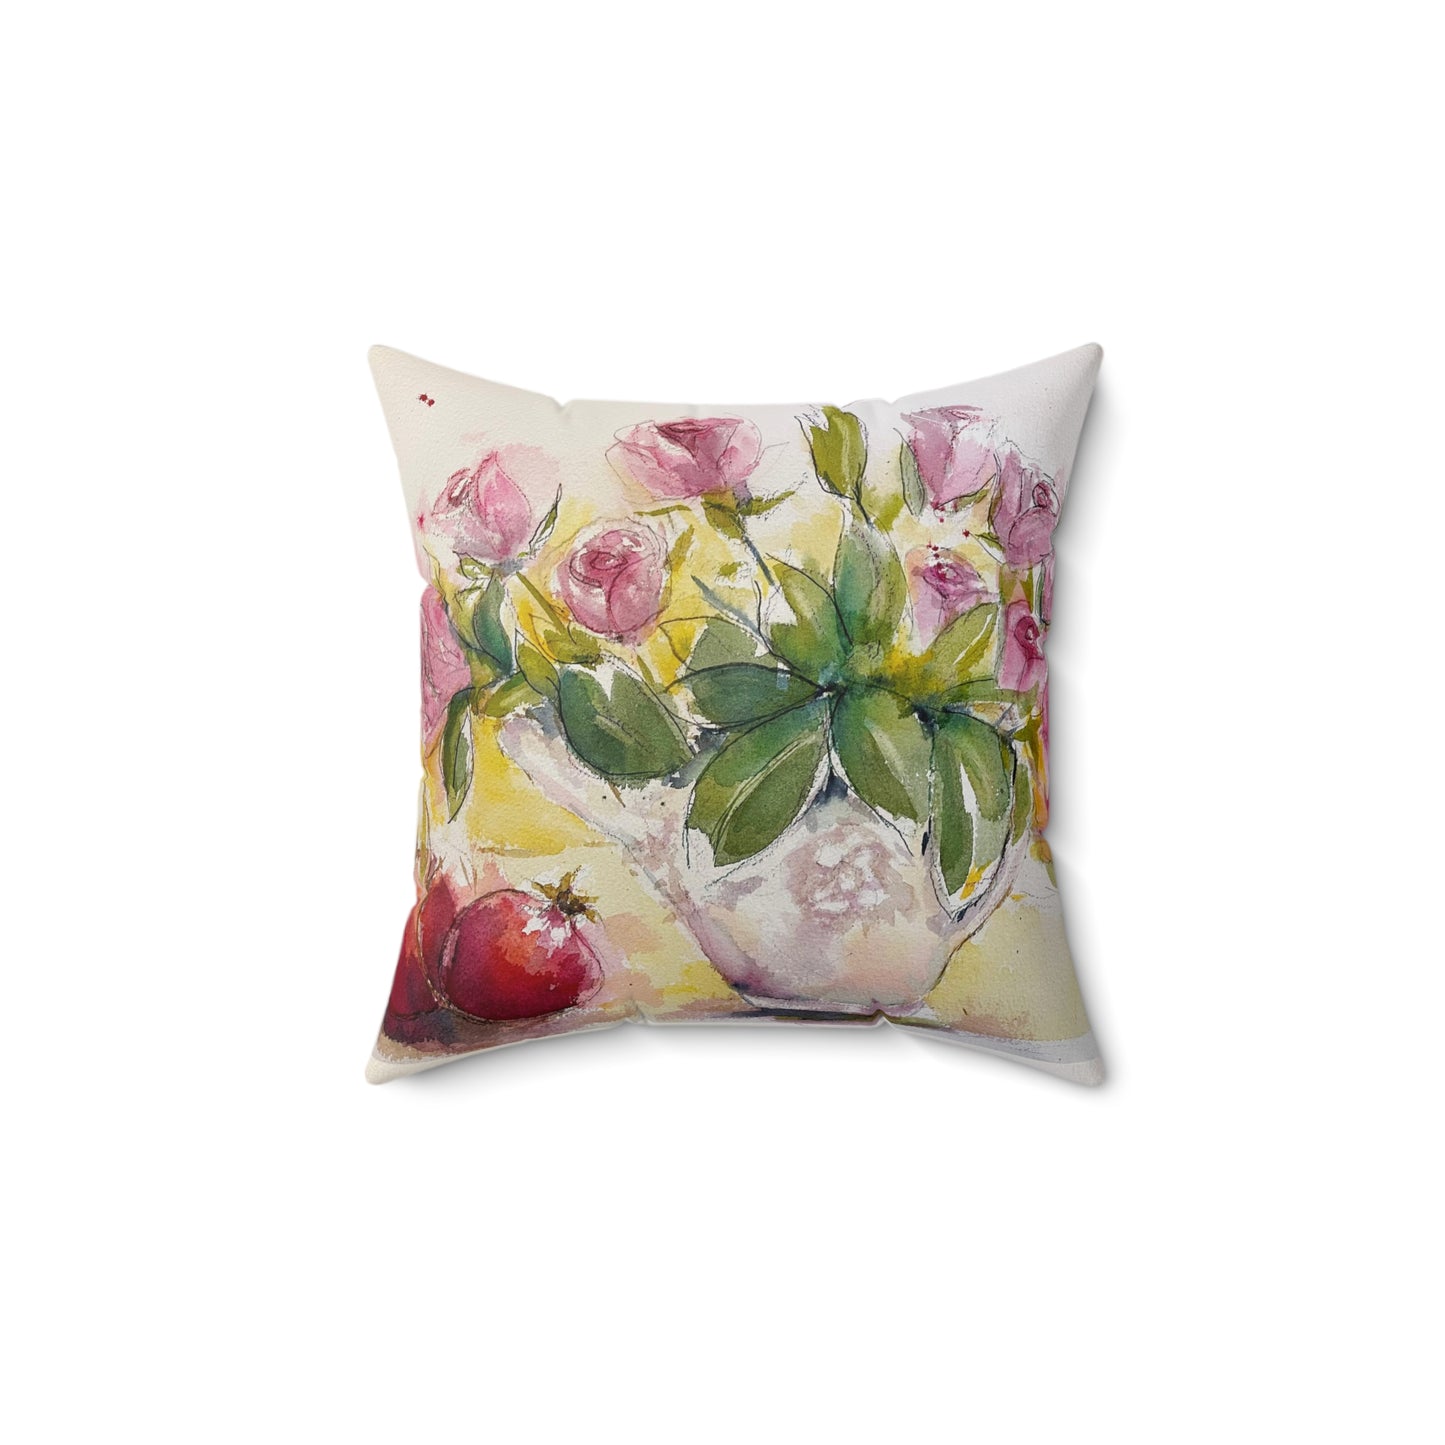 Roses and Pomegranates Elegant Indoor Spun Polyester Square Pillow